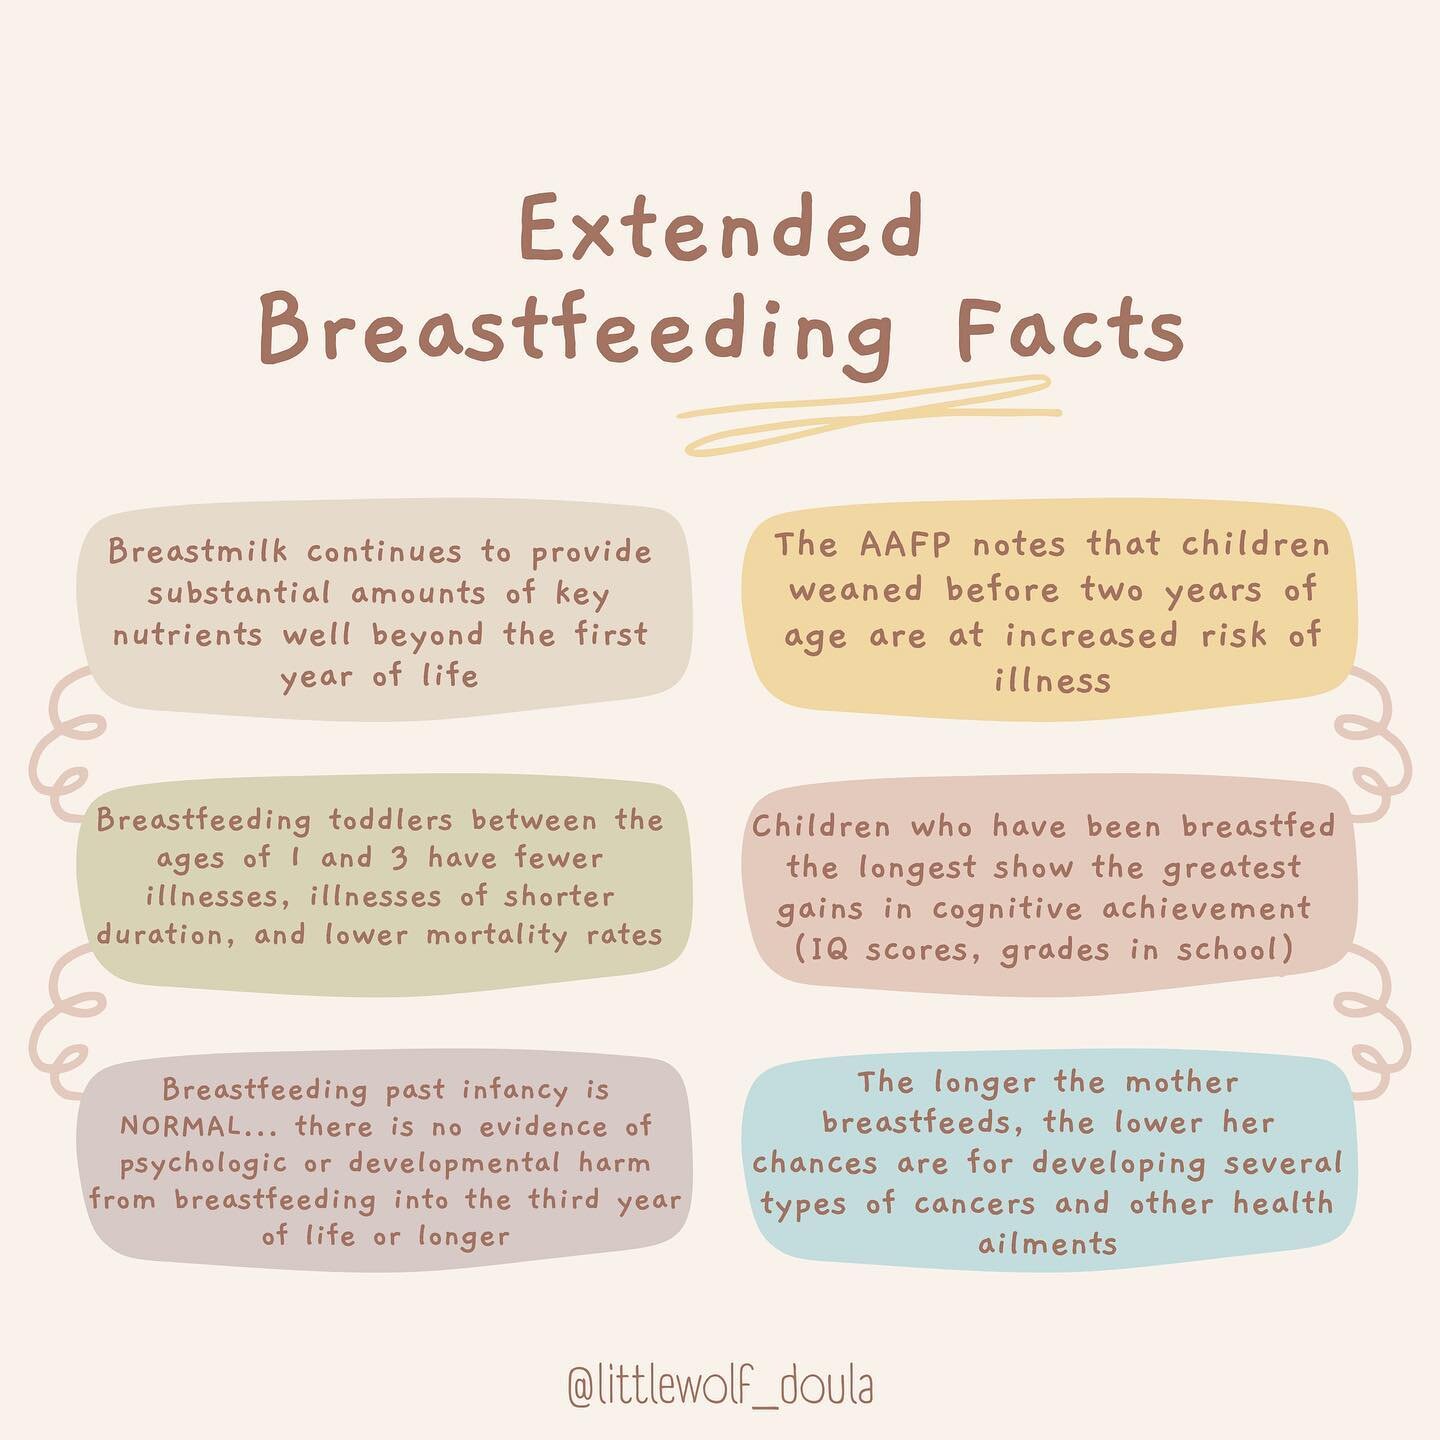 Let's talk about Extended Breastfeeding!!

First of all, let's establish something - breastfeeding past infancy is NORMAL!! Shout it from the rooftops!! 👏

🤱The AAP recommends that breastfeeding should continue for at least the first year of life a